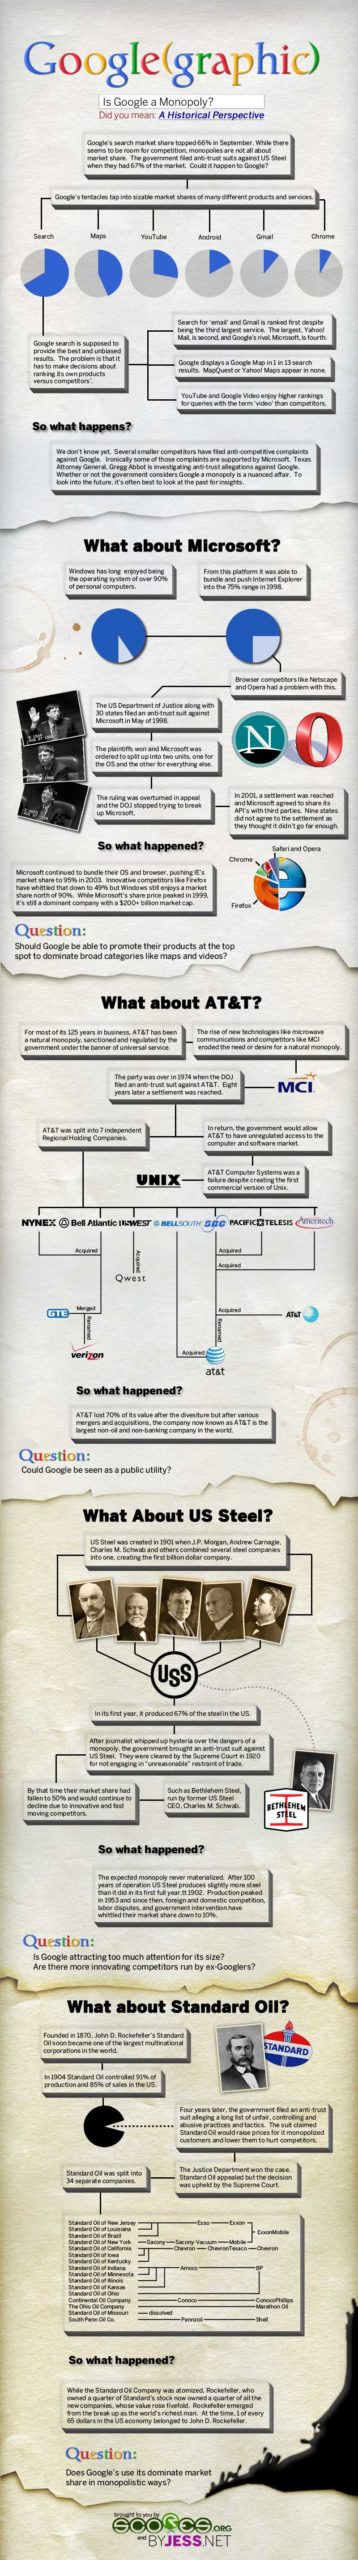 Is Google A Monopoly? Infographic